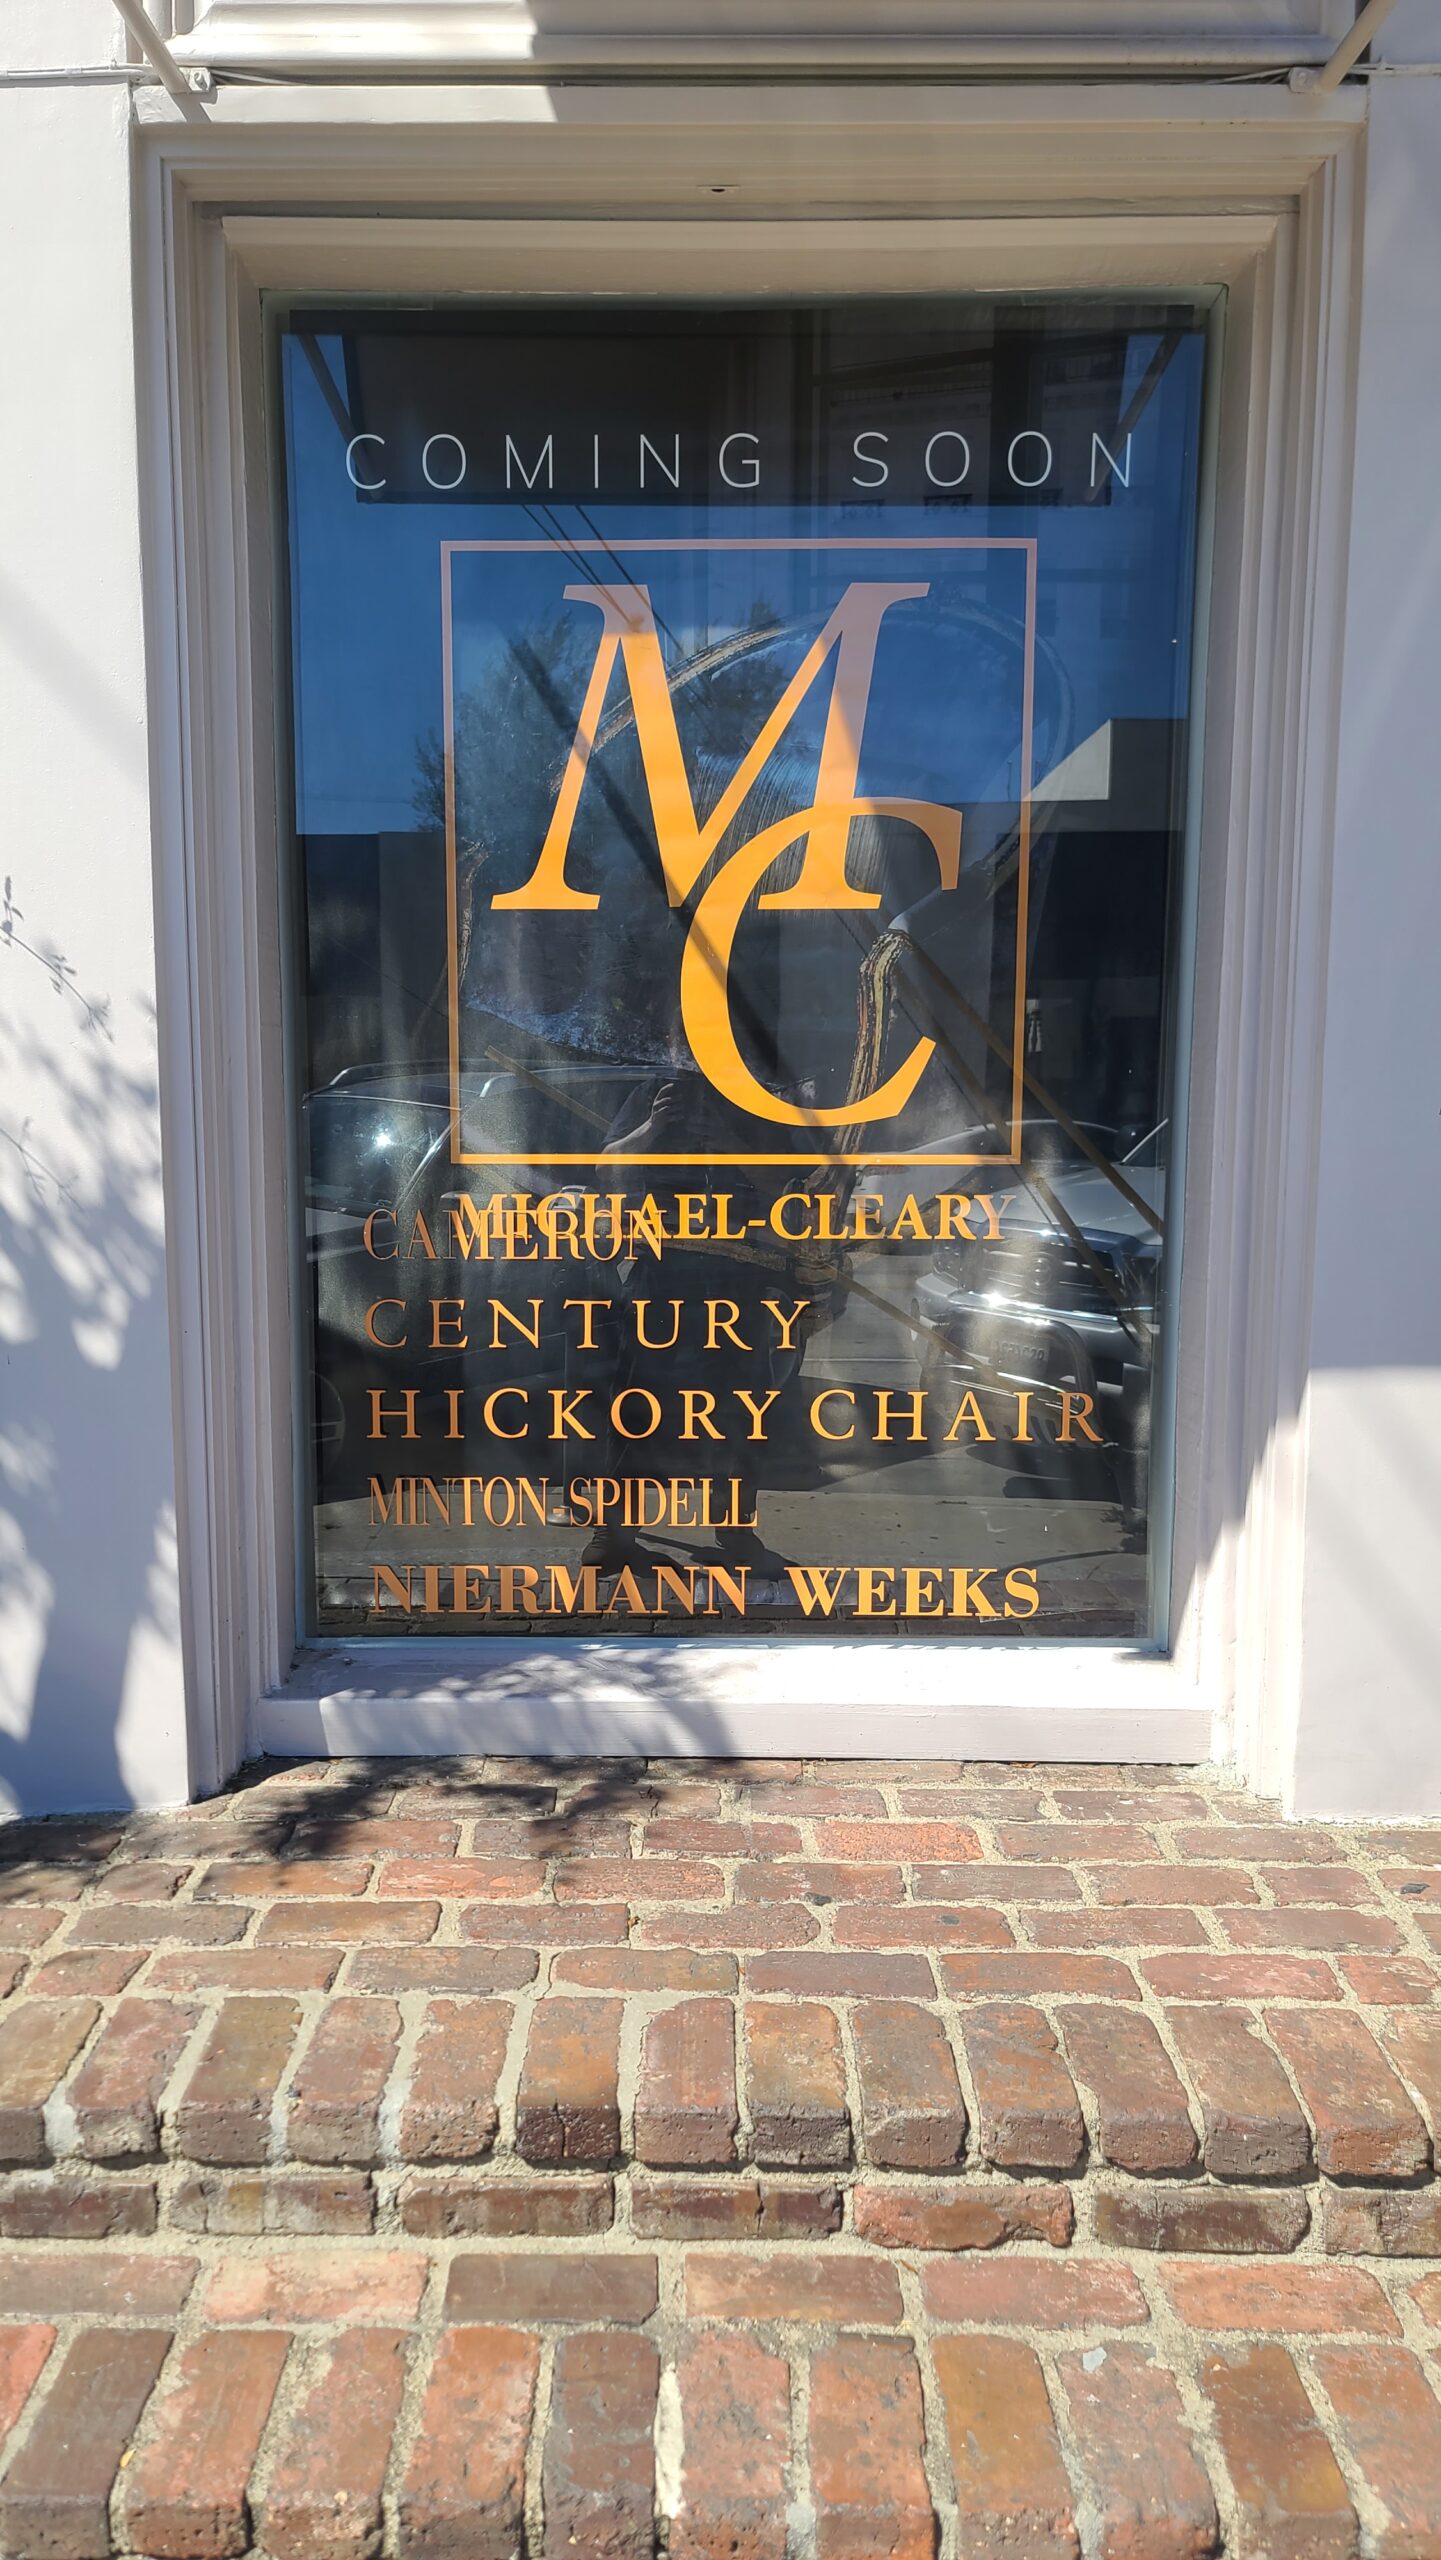 You are currently viewing Coming Soon Announcement Window Graphics for Michael Cleary in West Hollywood